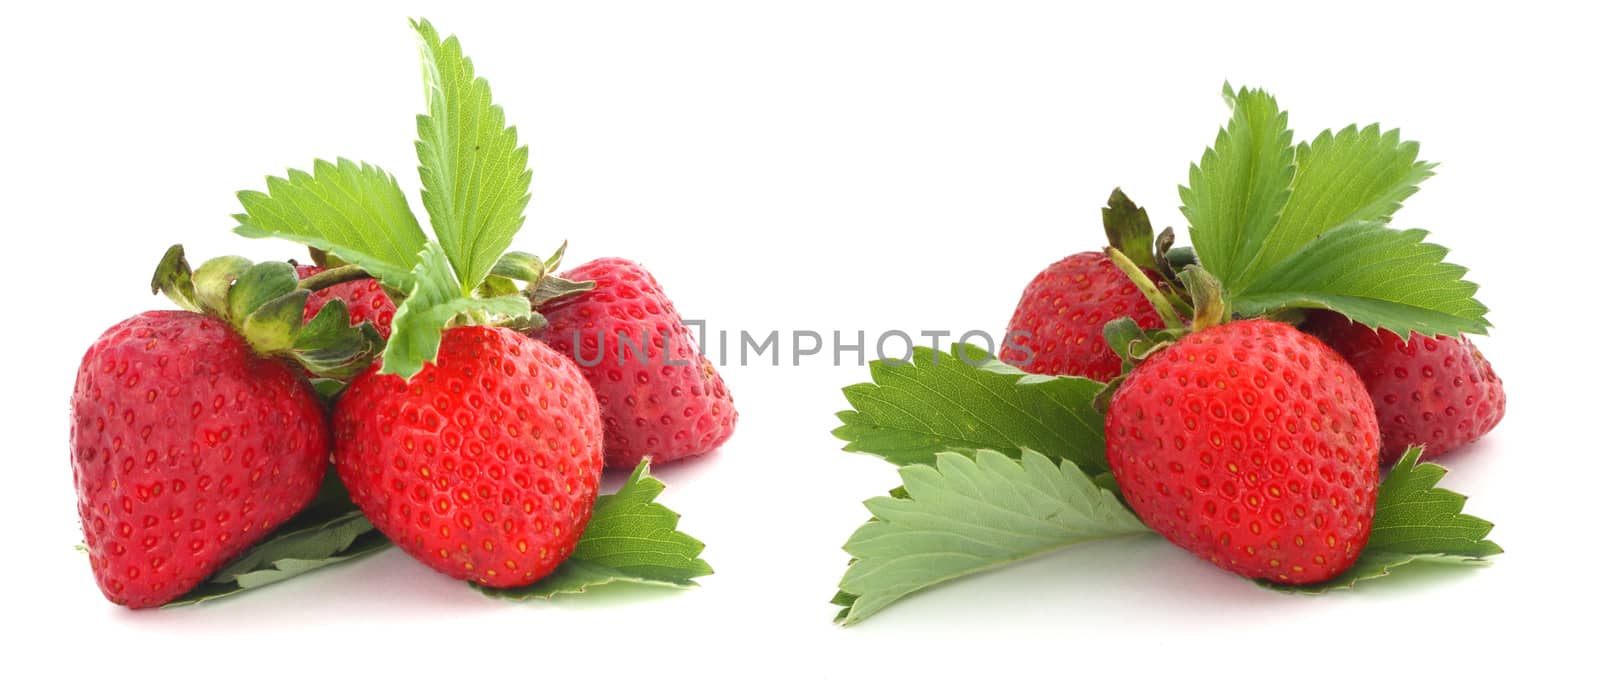 Strawberries with leaves isolated by destillat